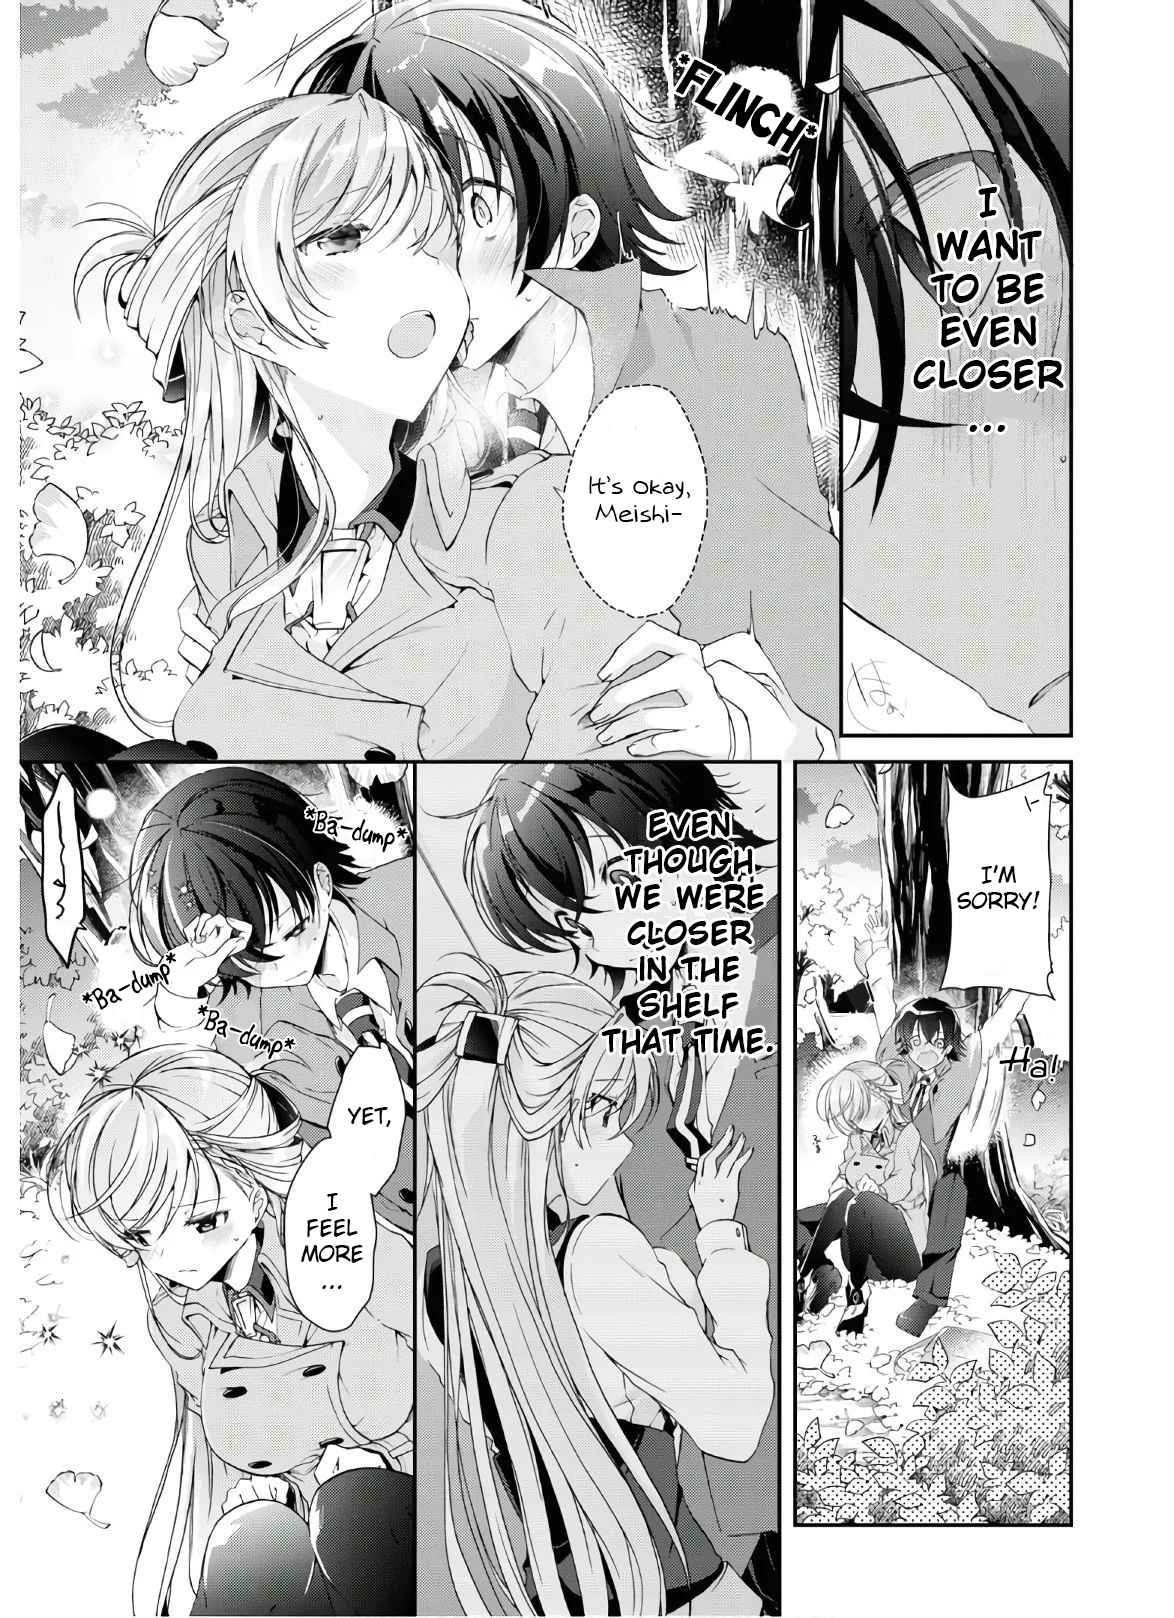 Isshiki-san Wants to Know About Love. - chapter 7 - #5